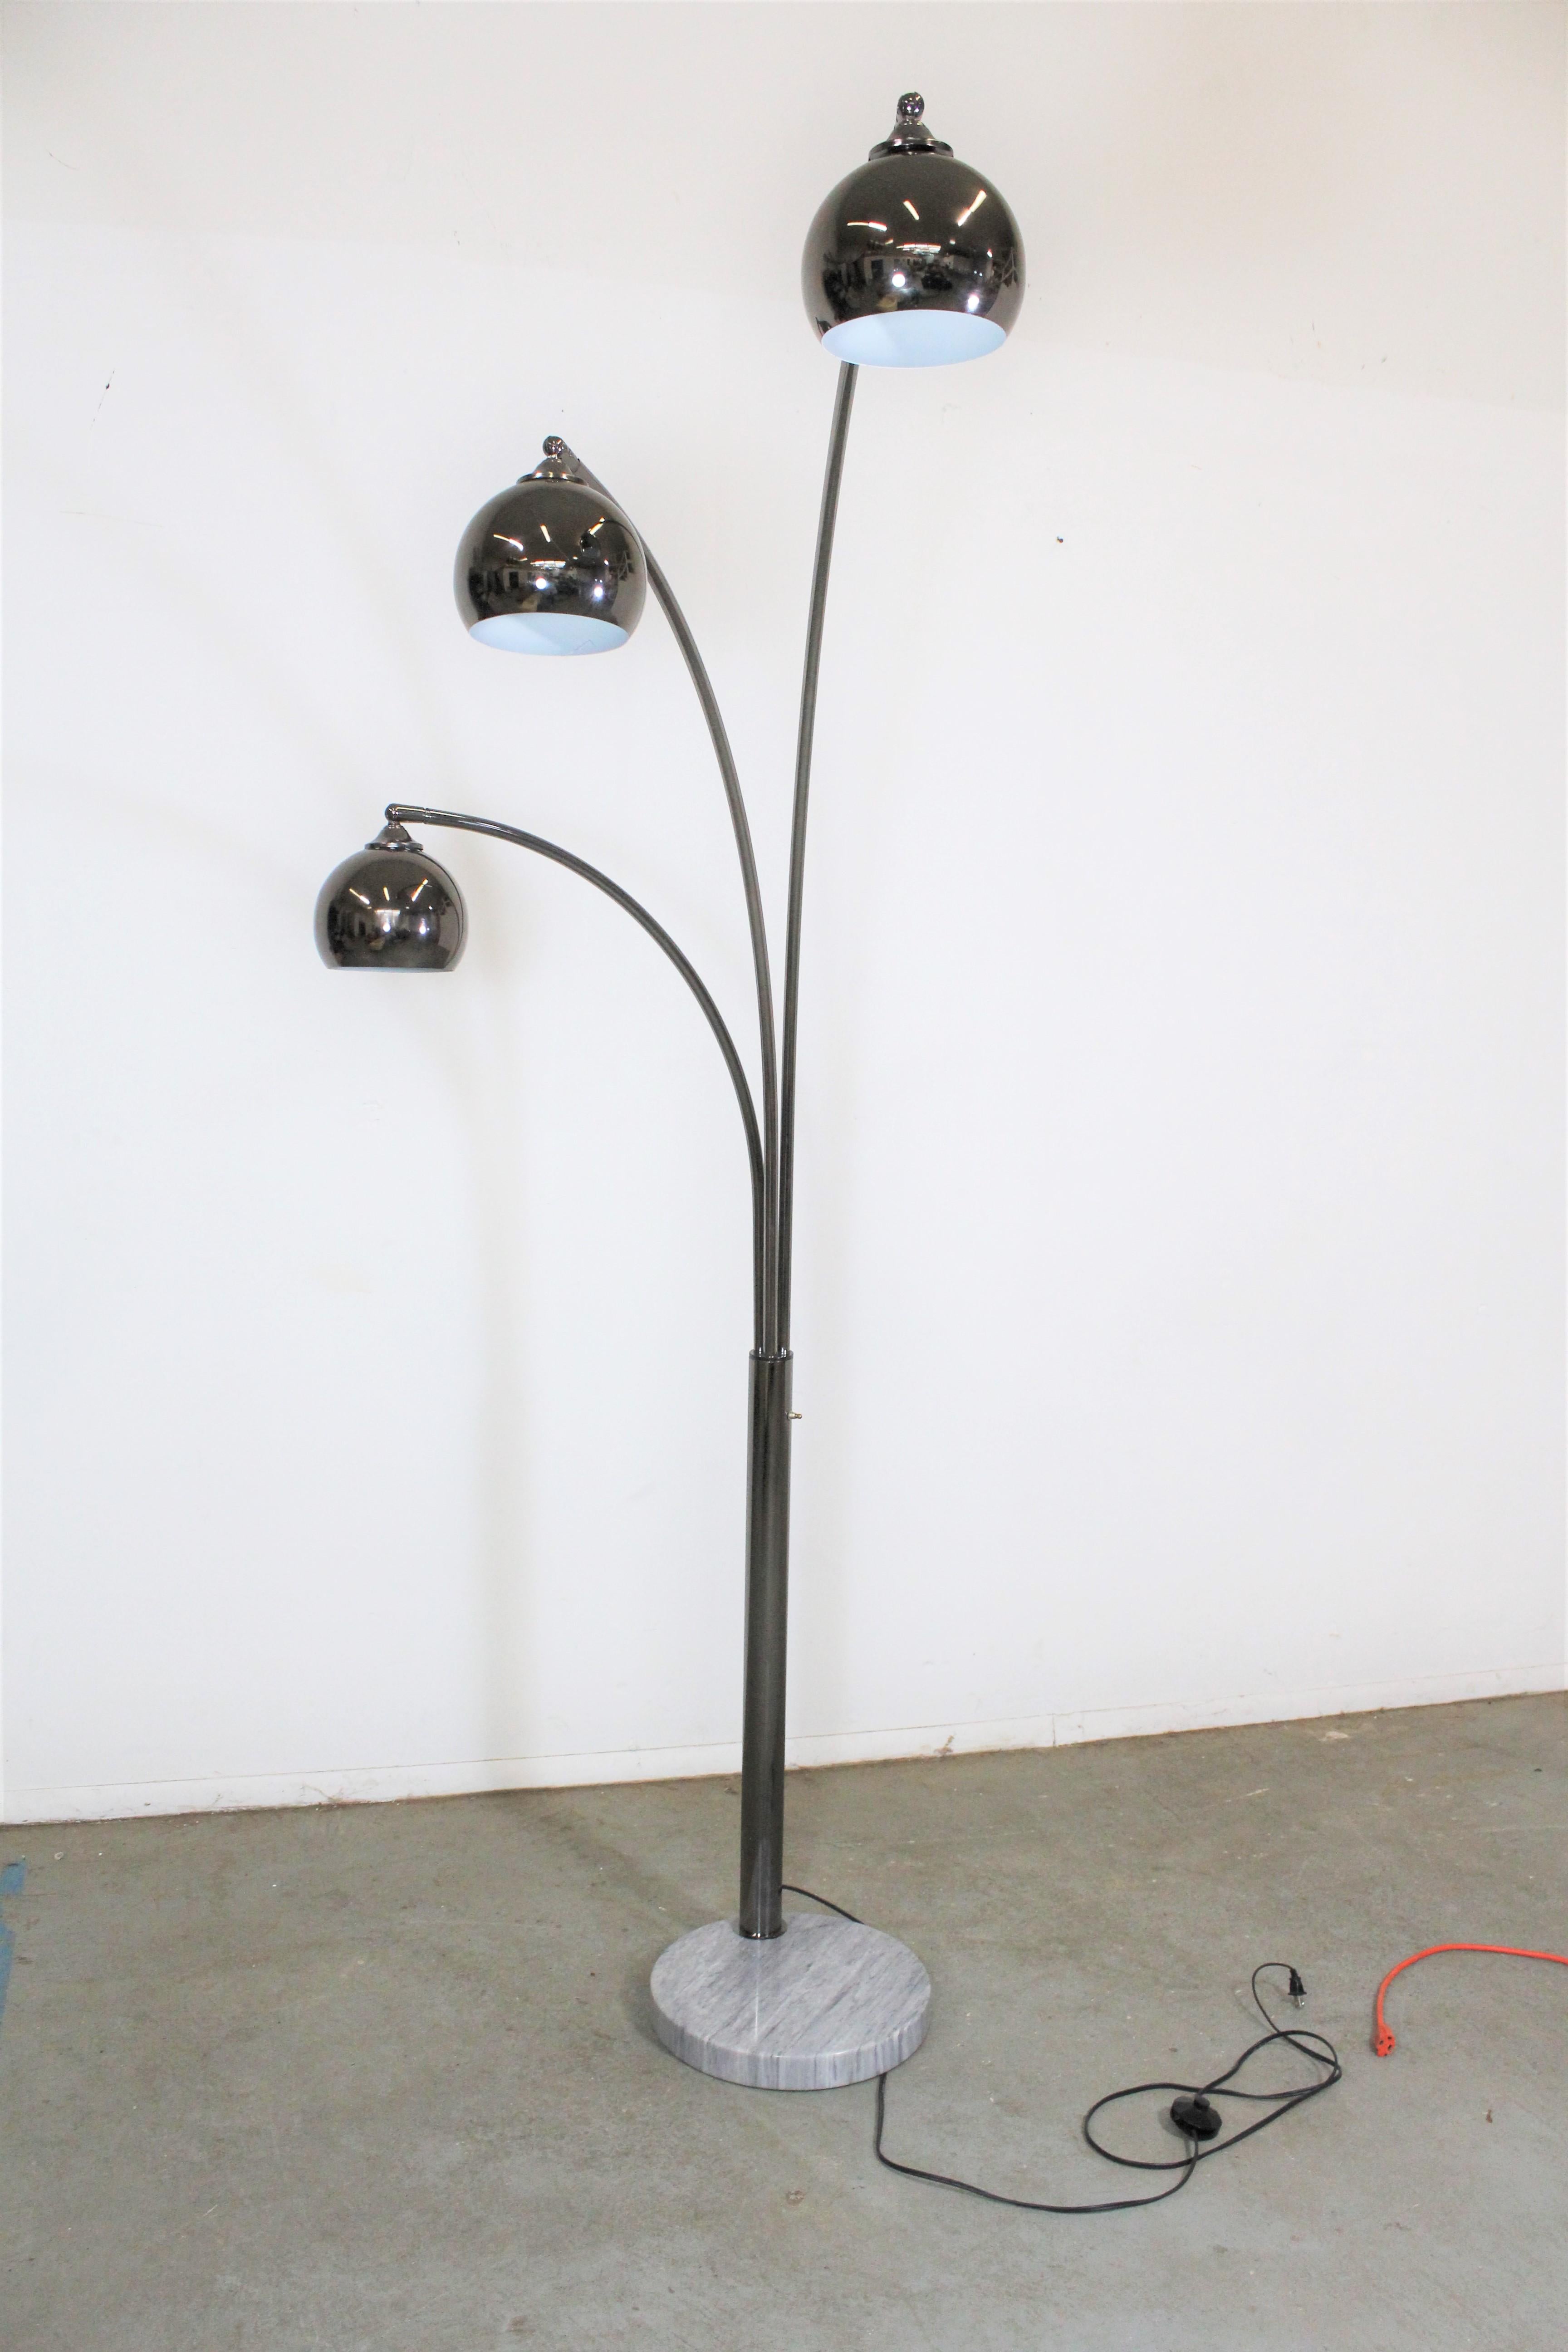 Offered is a super unique, vintage Italian chrome and marble floor lamp. Features a marble base with 3 arc-shaped chrome swiveling rods and 3 bulbs that pivot. The heads swivel from left to right and the pivot. The arms swivel about 180 degrees, not